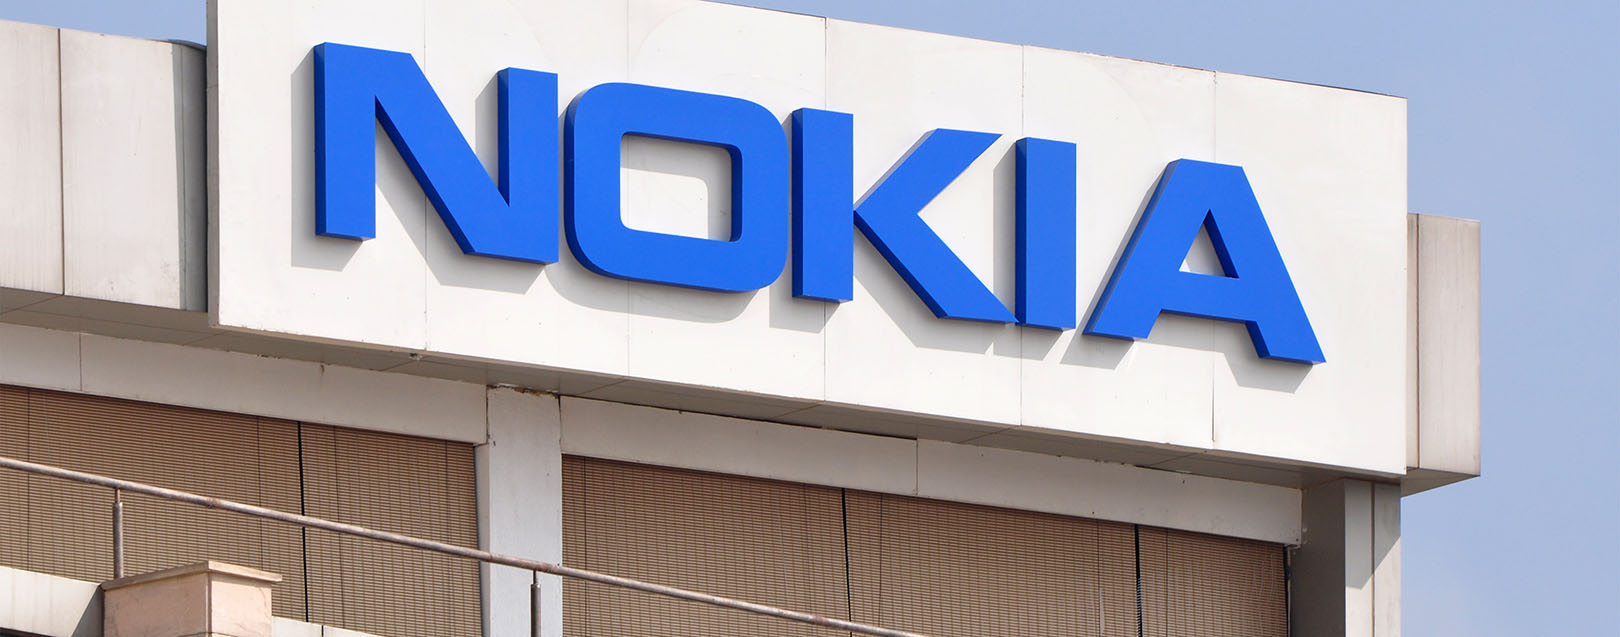 Nokia in talks with Indian telecom firms on 5G trials